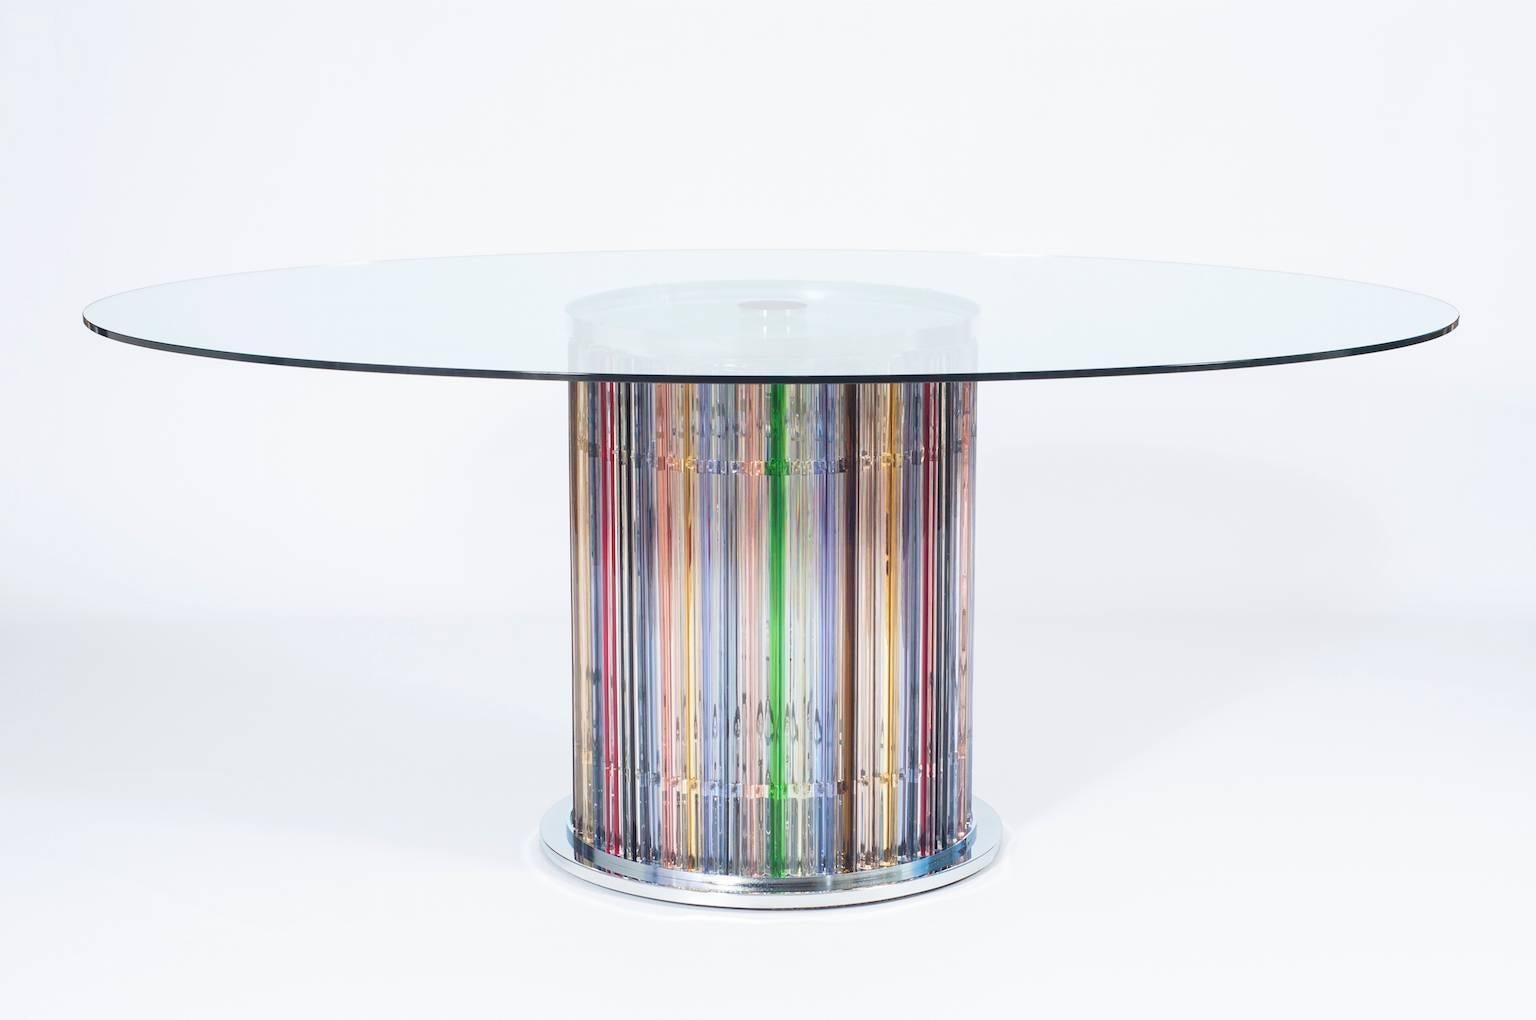 Hand-Crafted Italian Murano Dining Table with Lights in the Stem, circa 1980s